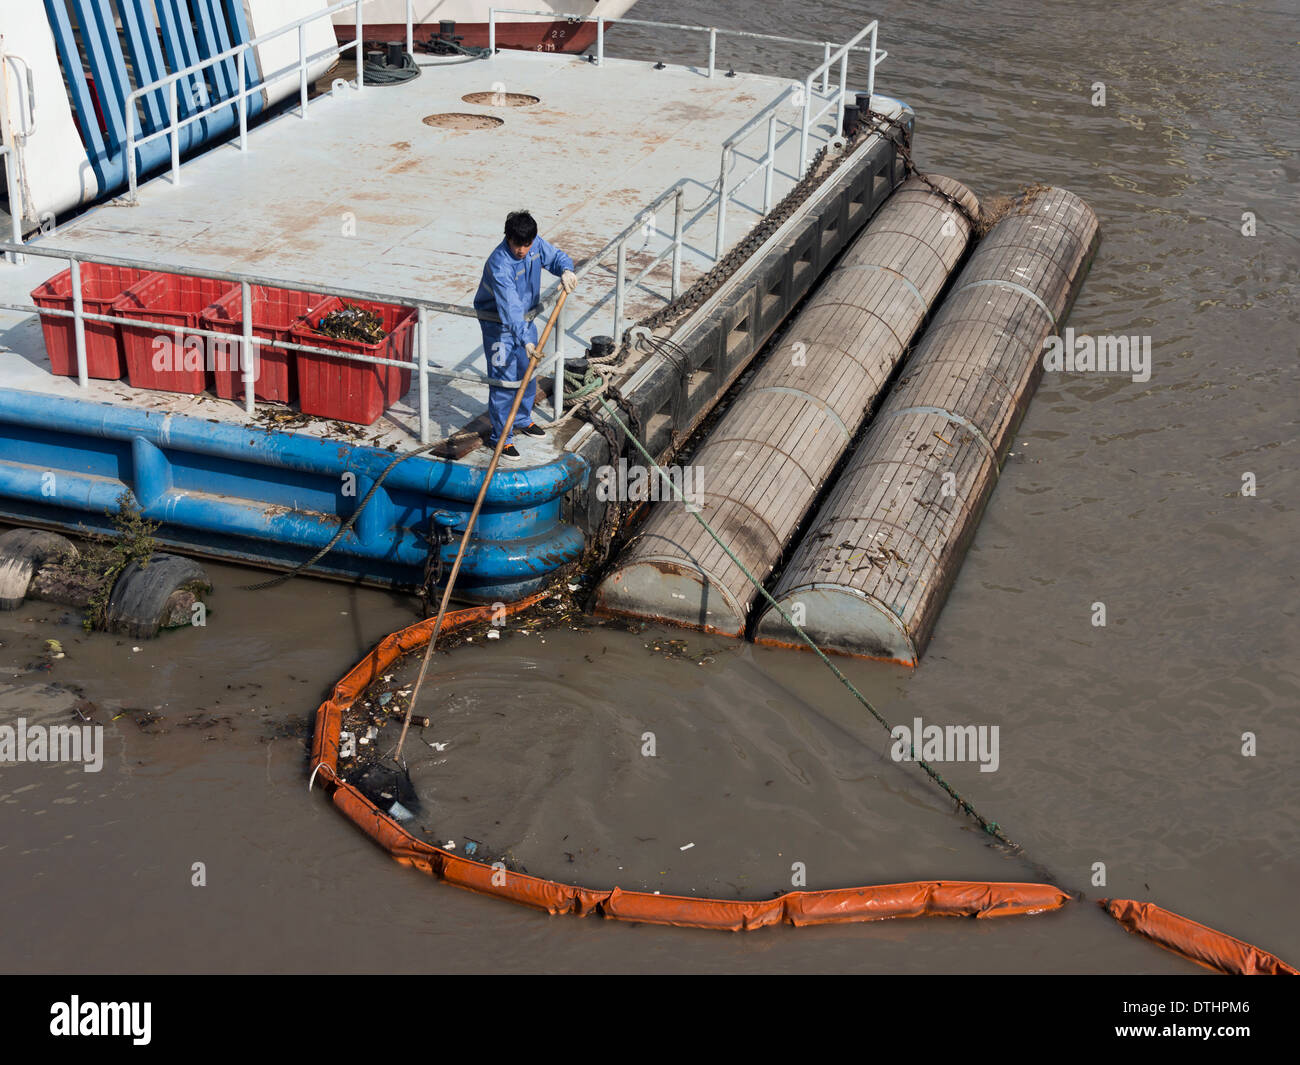 Worker cleaning up debris from the Huangpu River, Shanghai, China Stock Photo